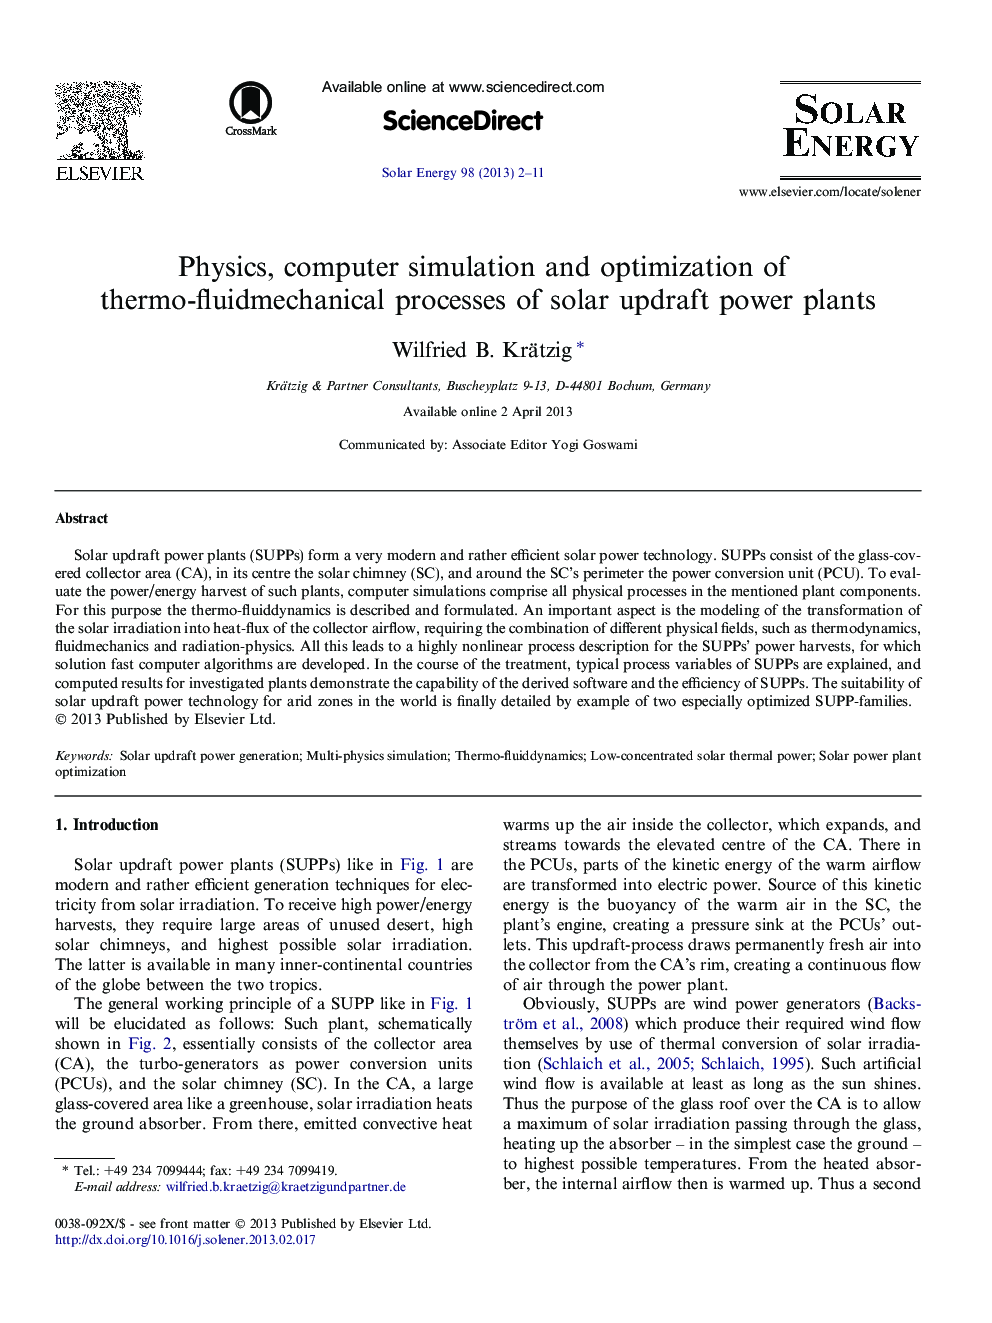 Physics, computer simulation and optimization of thermo-fluidmechanical processes of solar updraft power plants